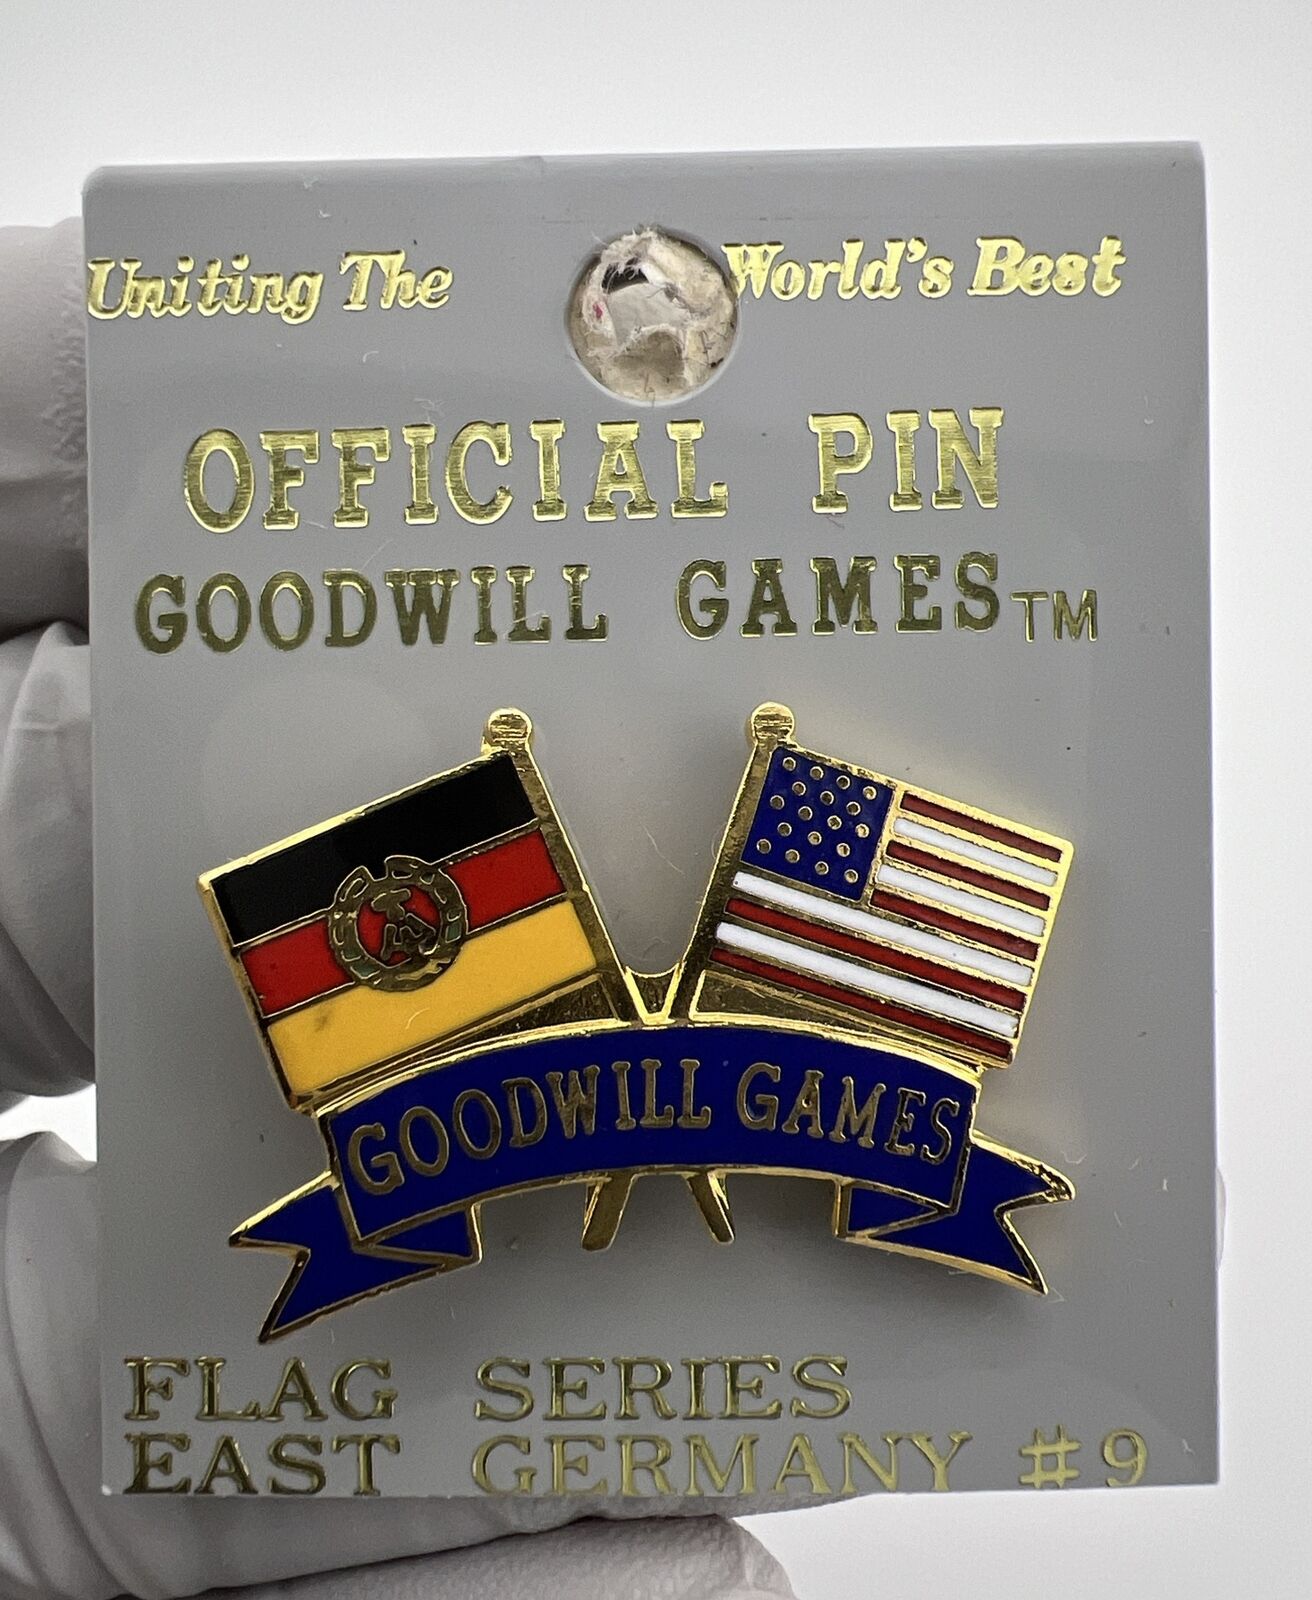 Vintage 1990 Goodwill Games East Germany Pin. Flag Series #9